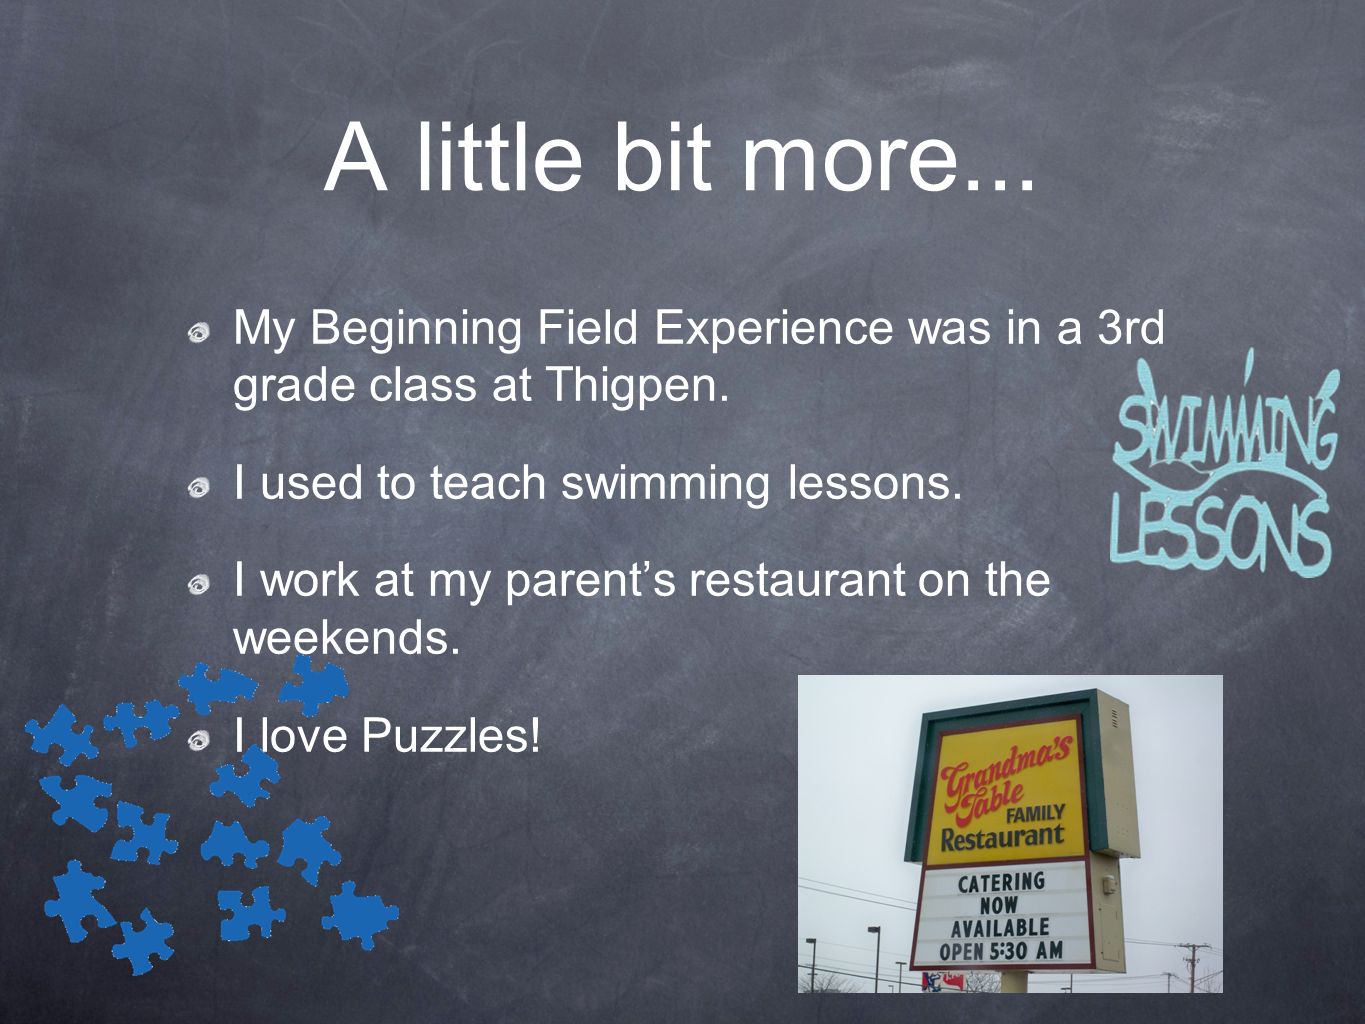 A little bit more... My Beginning Field Experience was in a 3rd grade class at Thigpen.